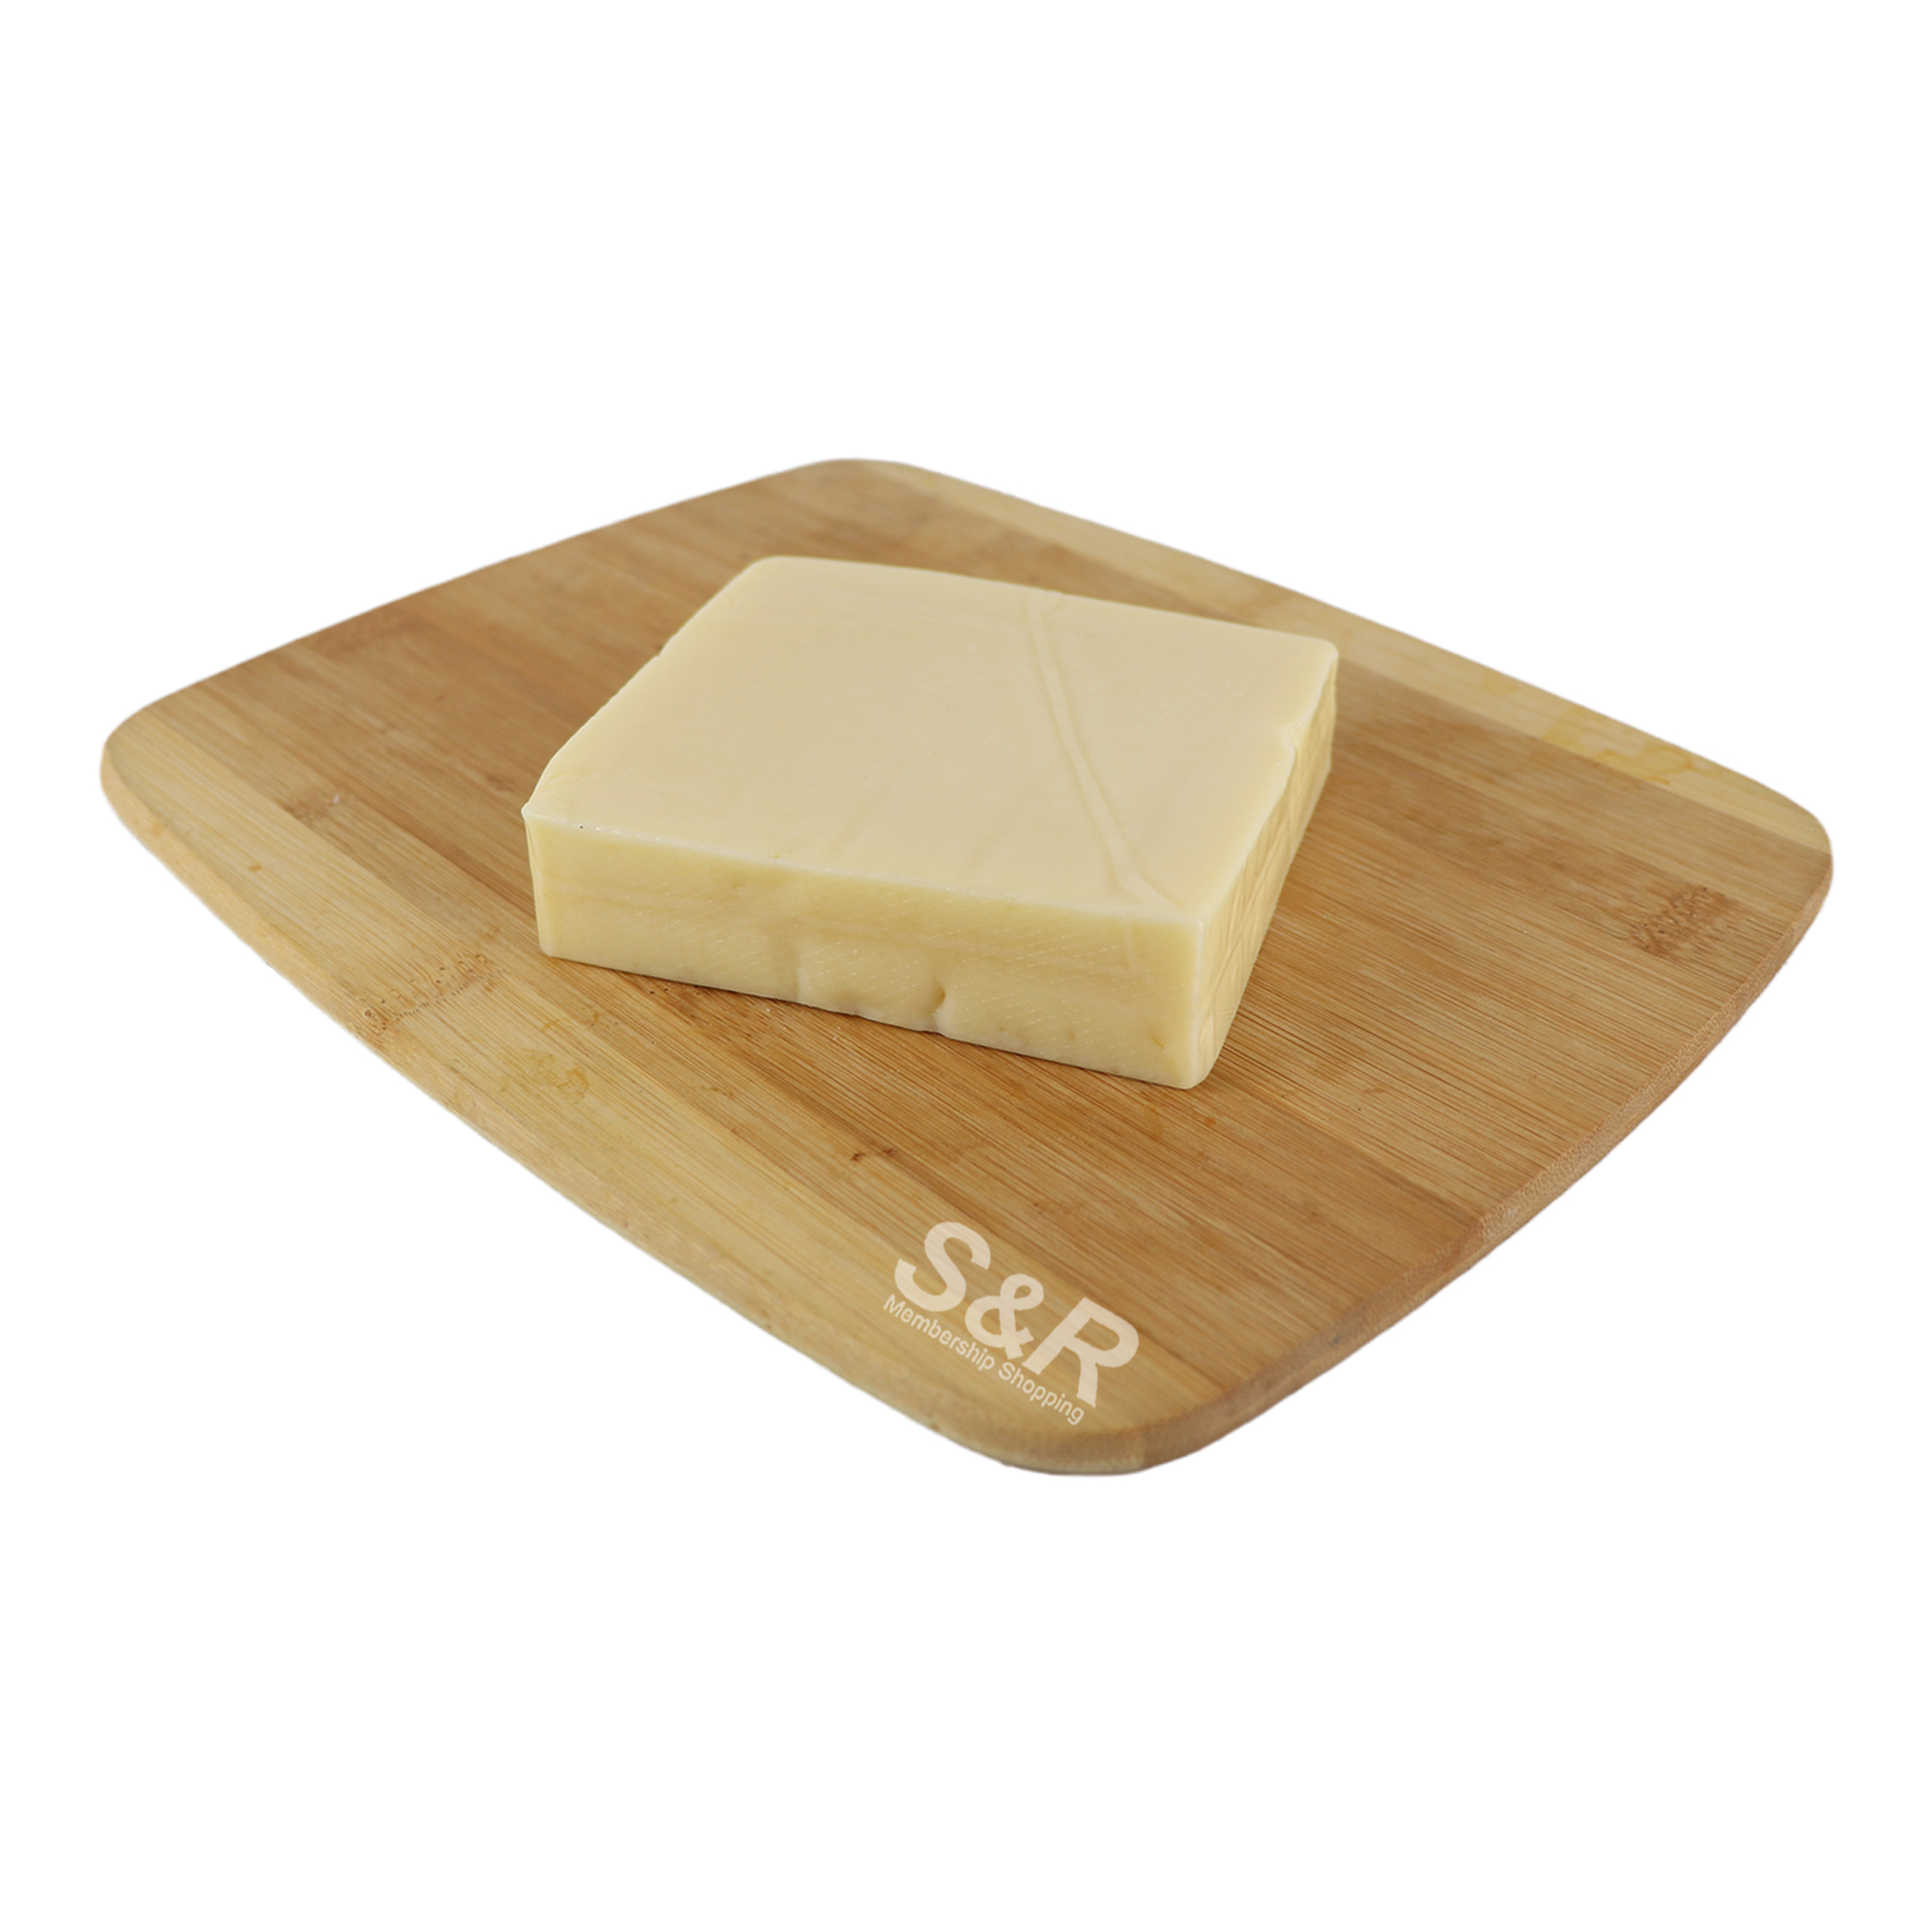 S&R Emmental Cheese approx. 500g